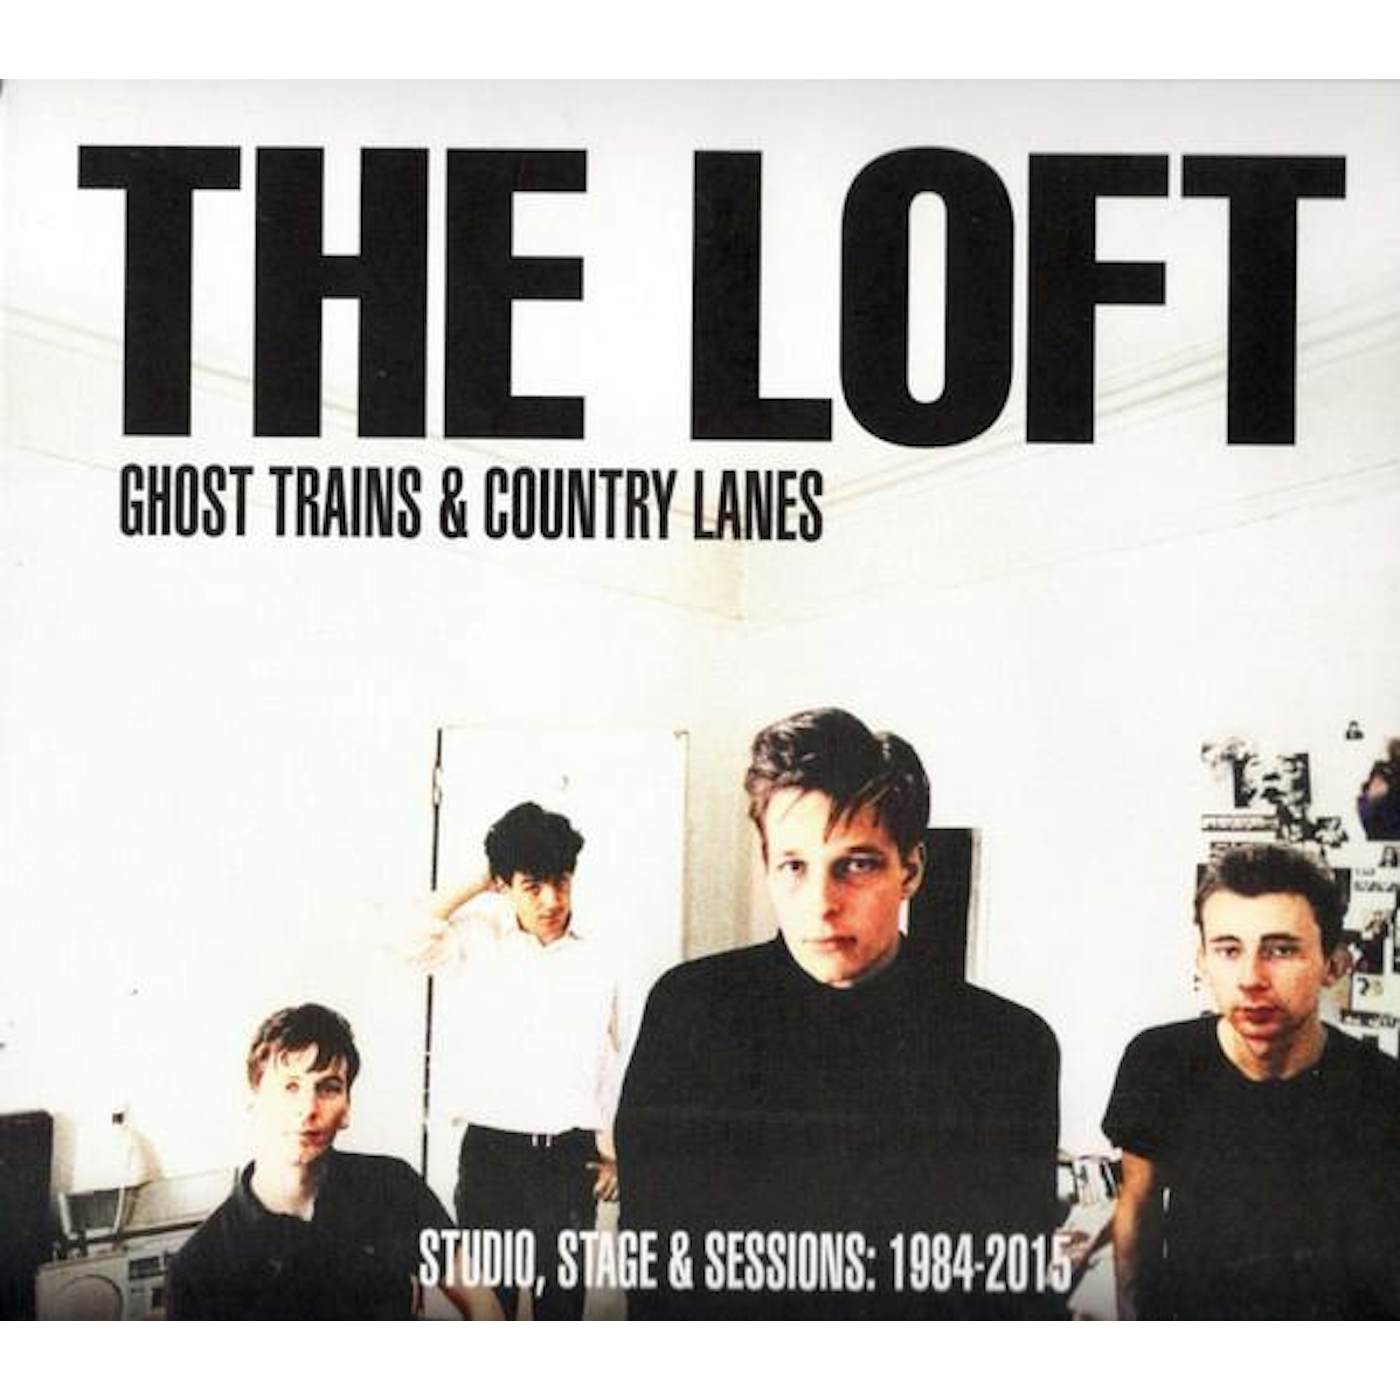 Loft GHOST TRAINS & COUNTRY LANES: STUDIO, STAGE & SESSIONS 1984-2005 (2CD/DIGIPAK) CD